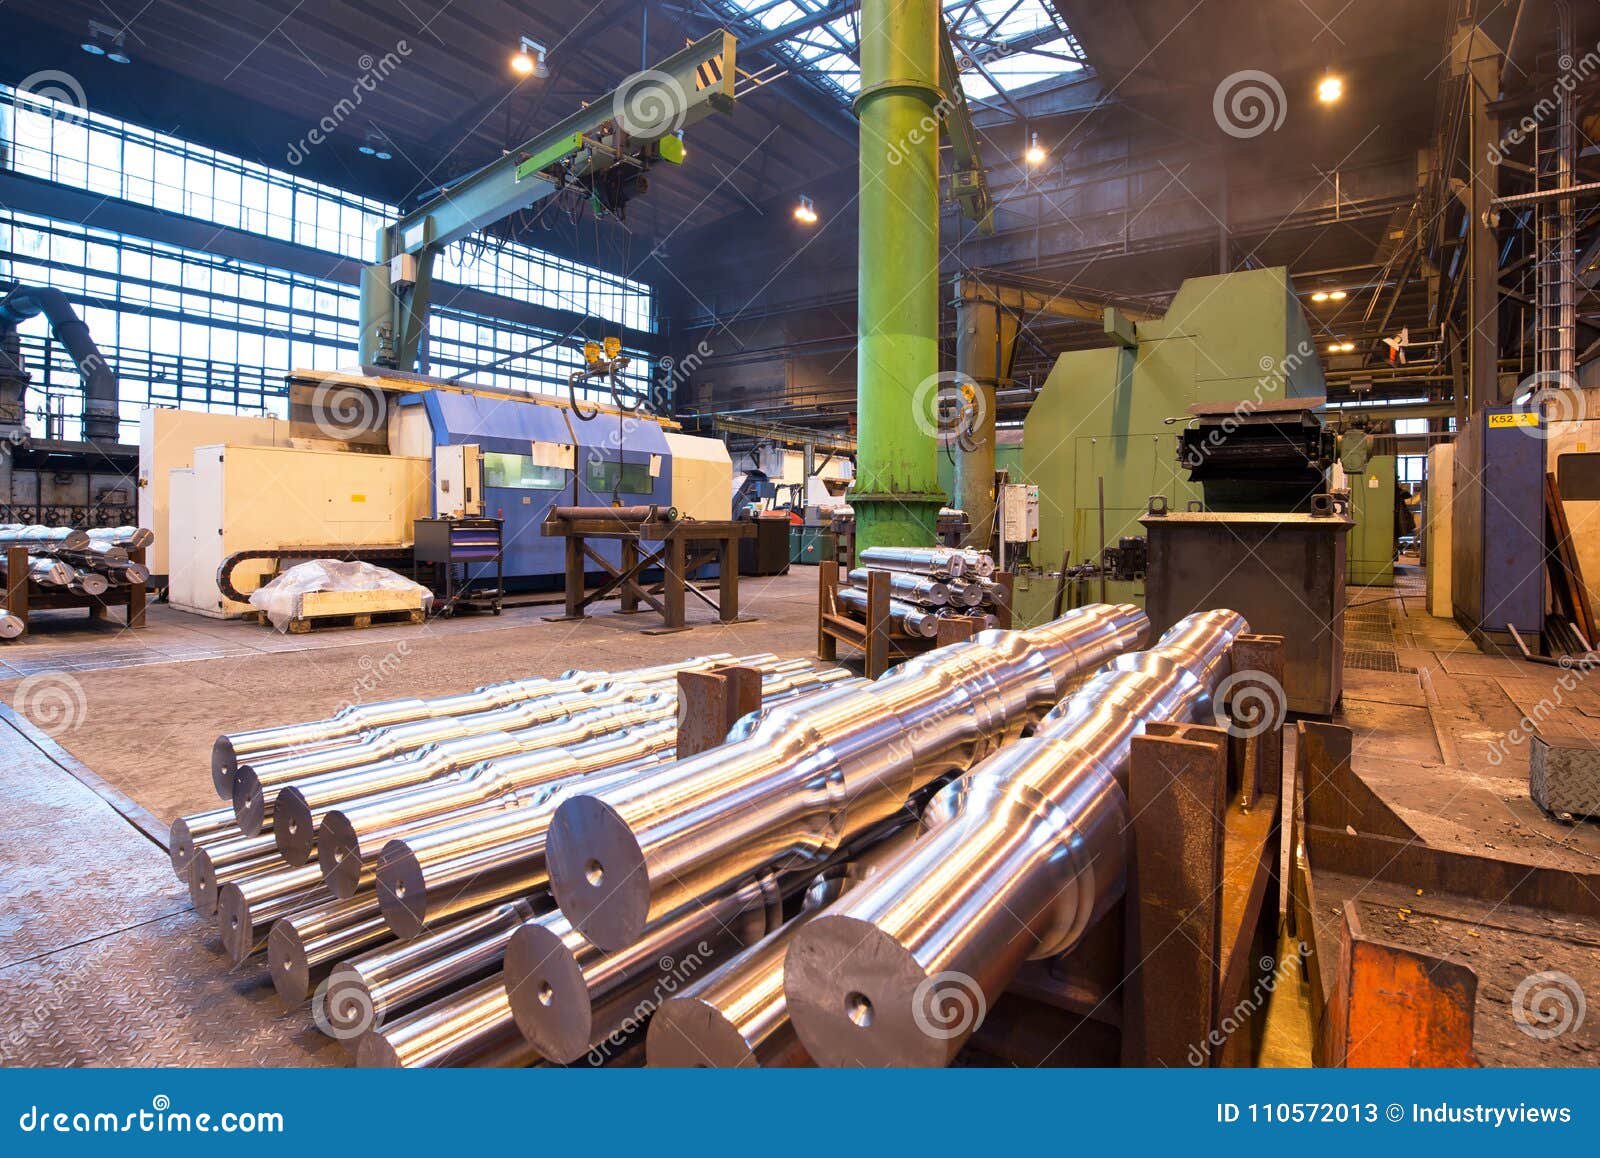 industrial production of shafts for heavy industry